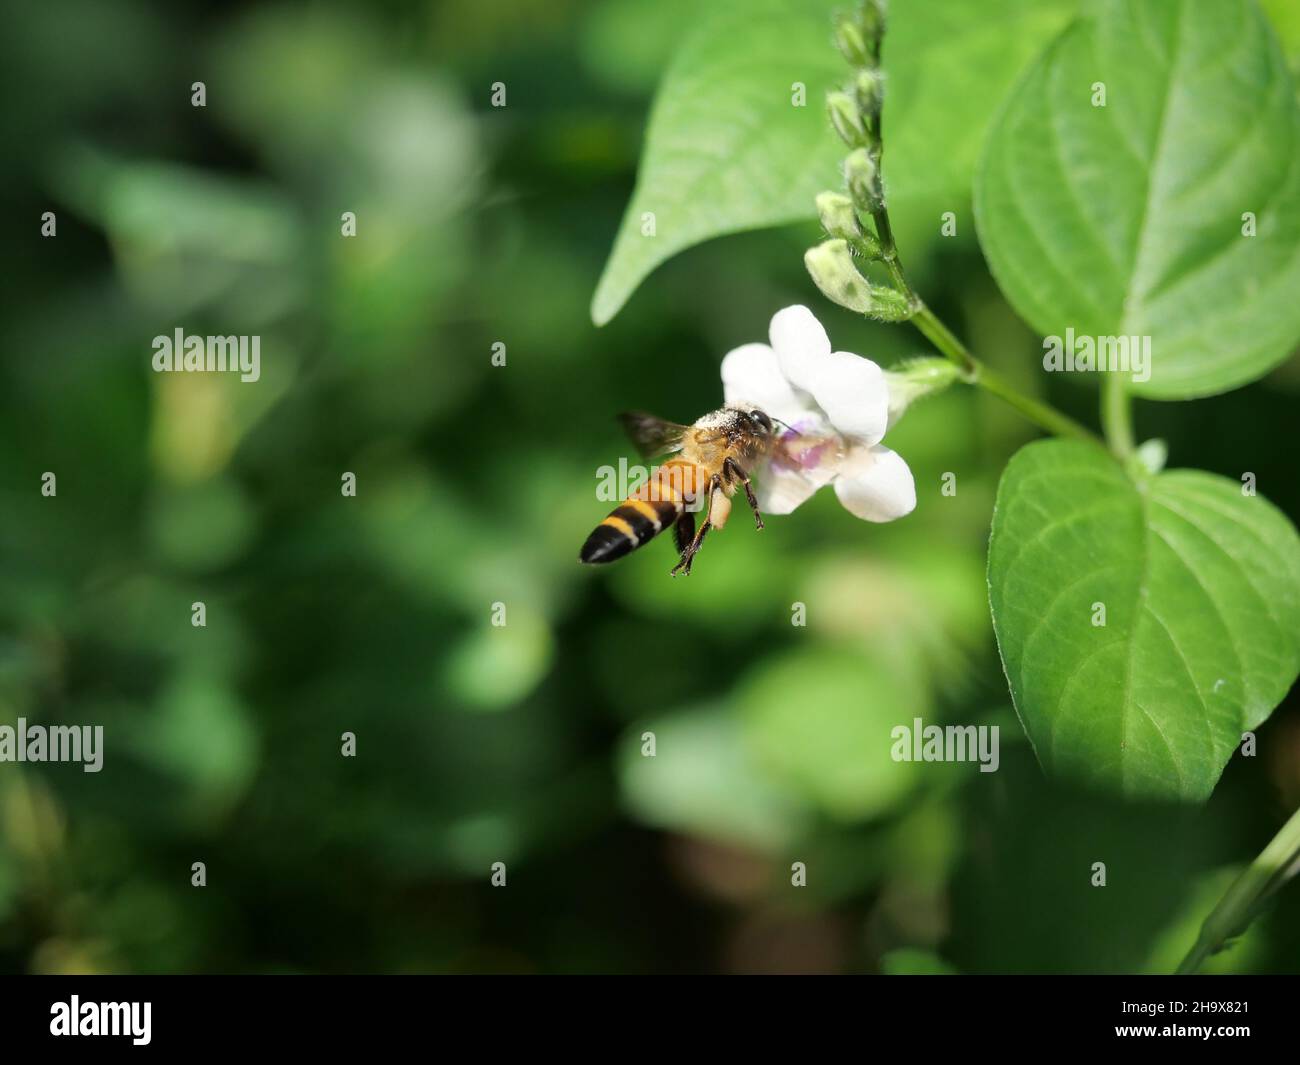 Giant honey bee seeking nectar on white Chinese violet or coromandel or creeping foxglove ( Asystasia gangetica ) blossom in field with natural green Stock Photo